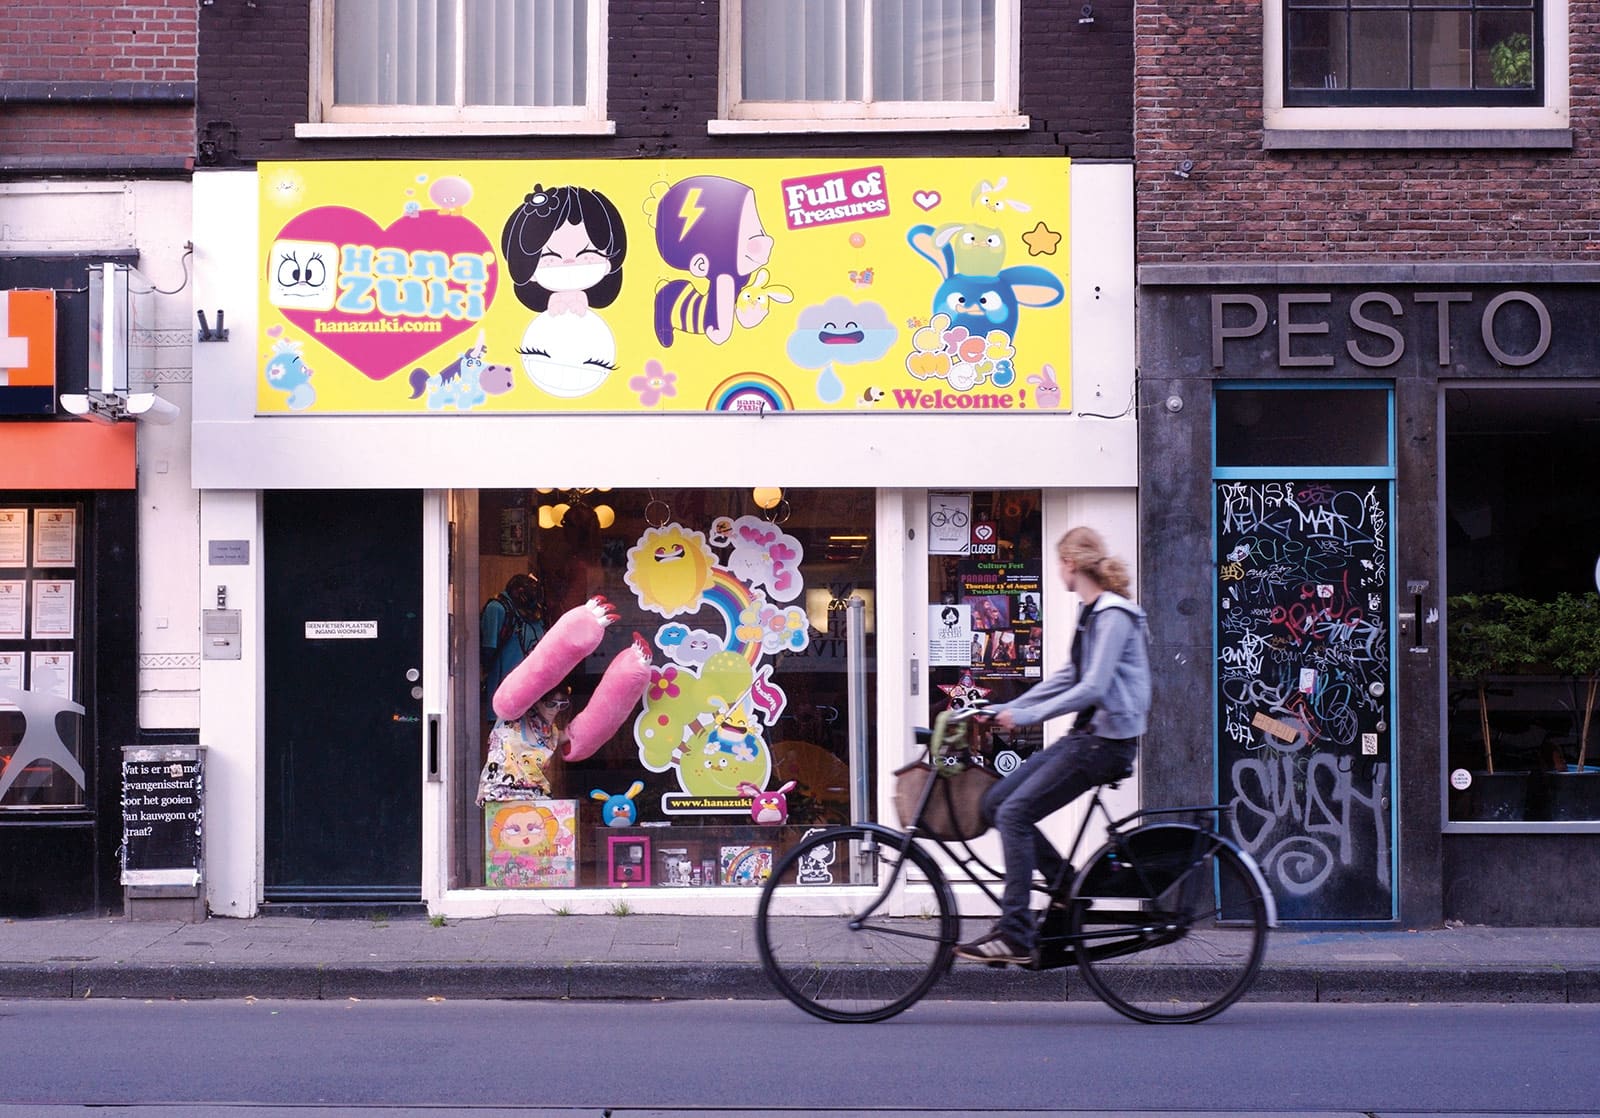 The Hanazuki storefront in Amsterdam, Netherlands. The store no longer exists.